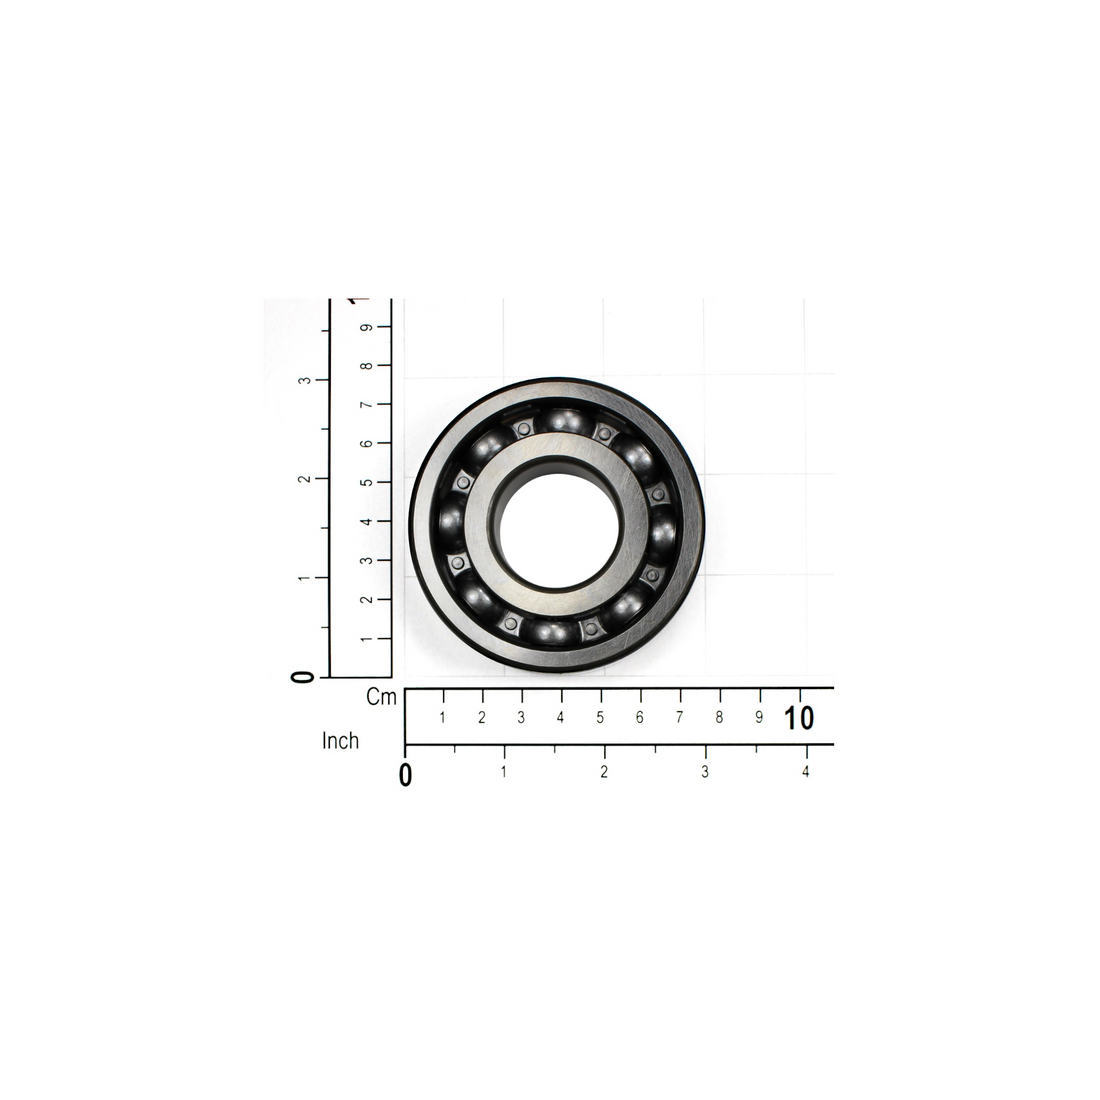 R&M Parts - Bearing, Part Number: 6300413060